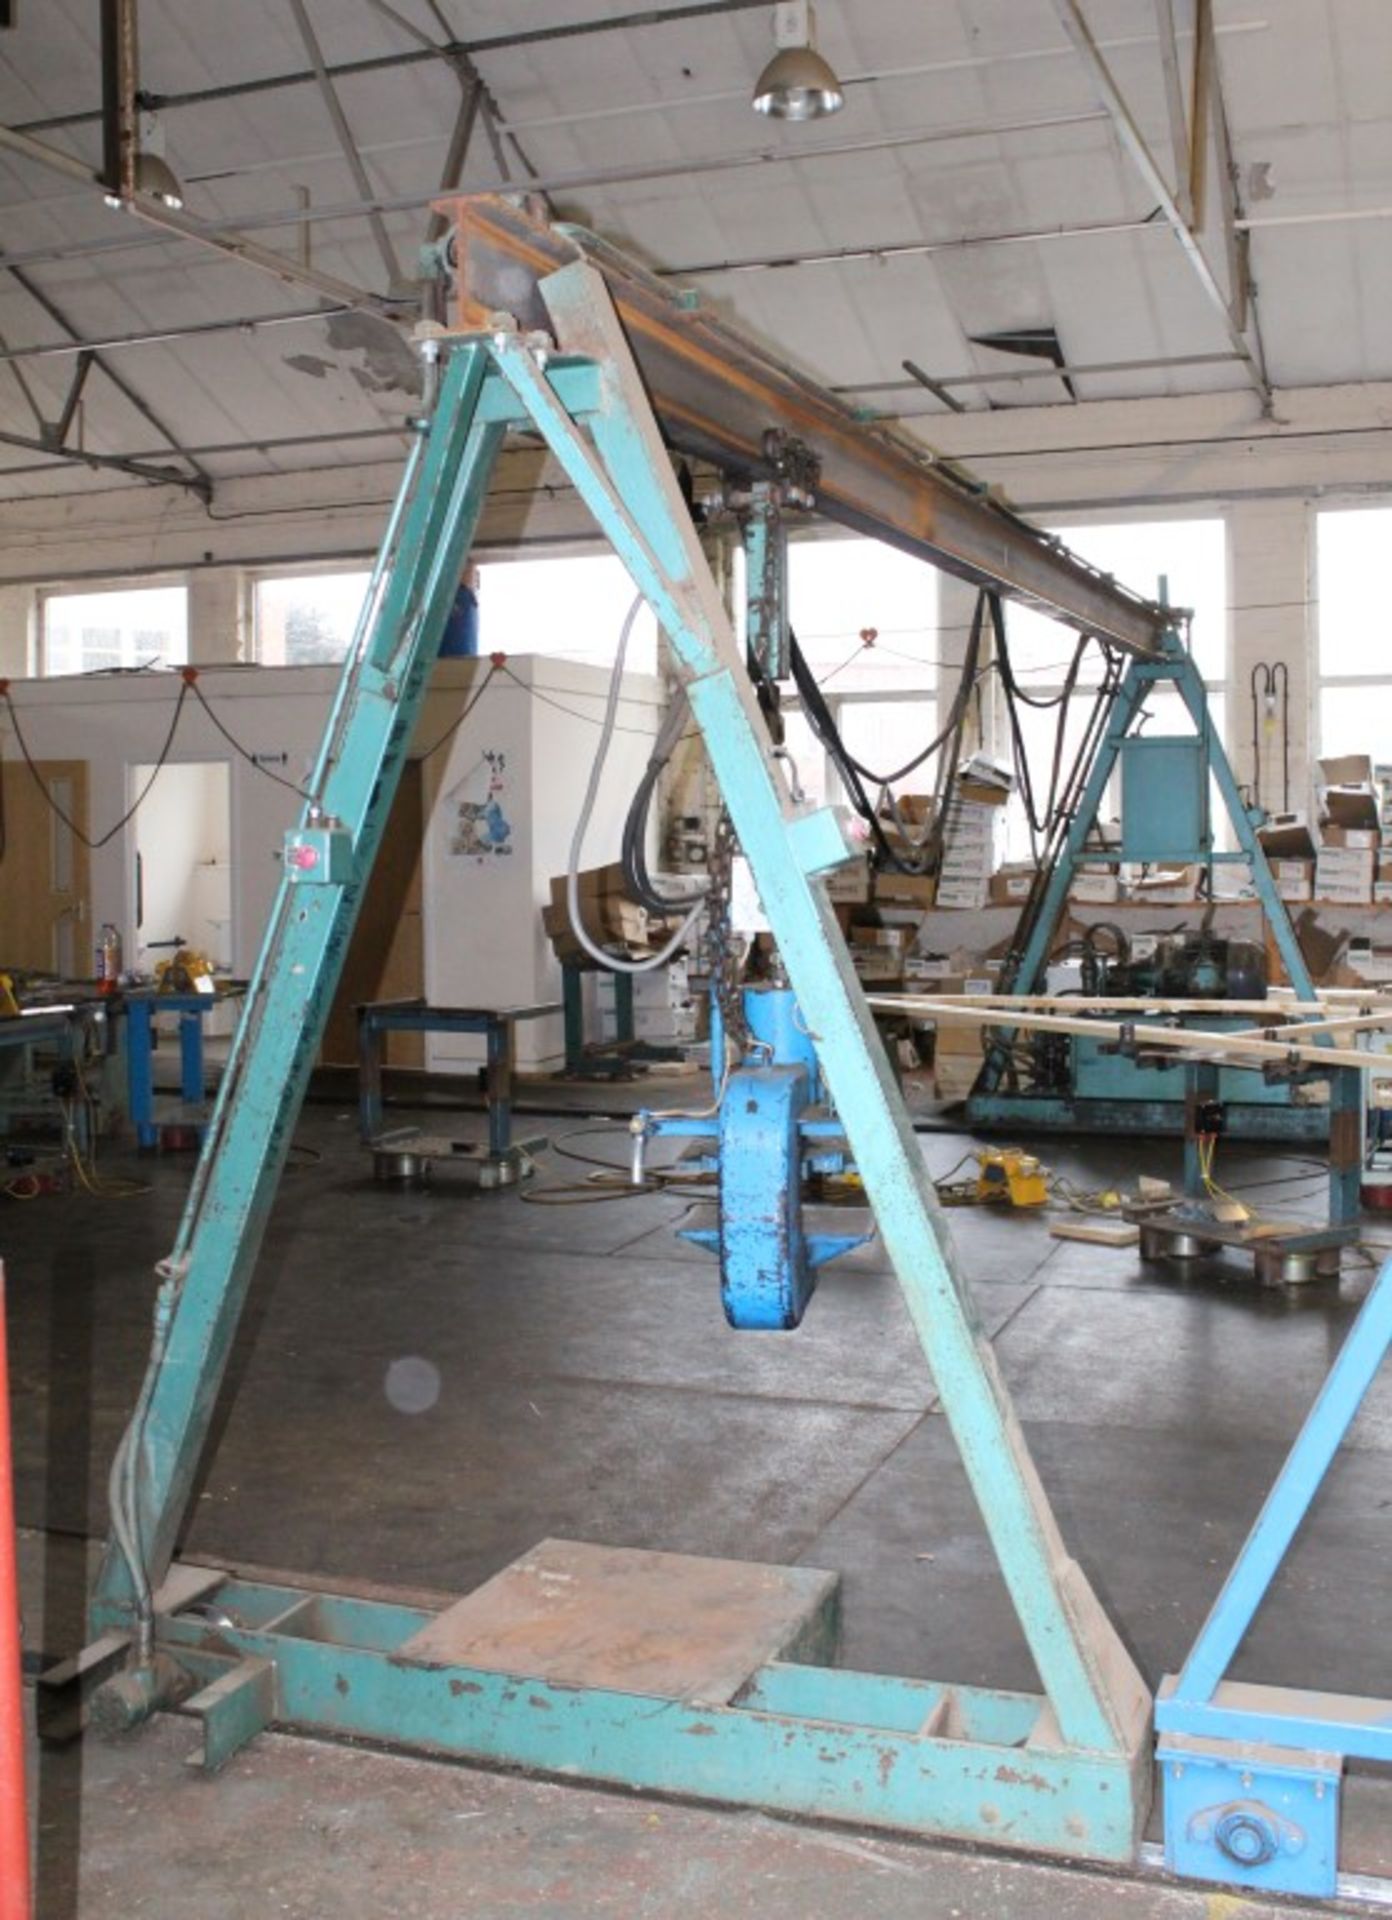 1 x Roof Trus Fabrication Press With Press Head - 3 Phase - Length 700cm Height 252cm - Working